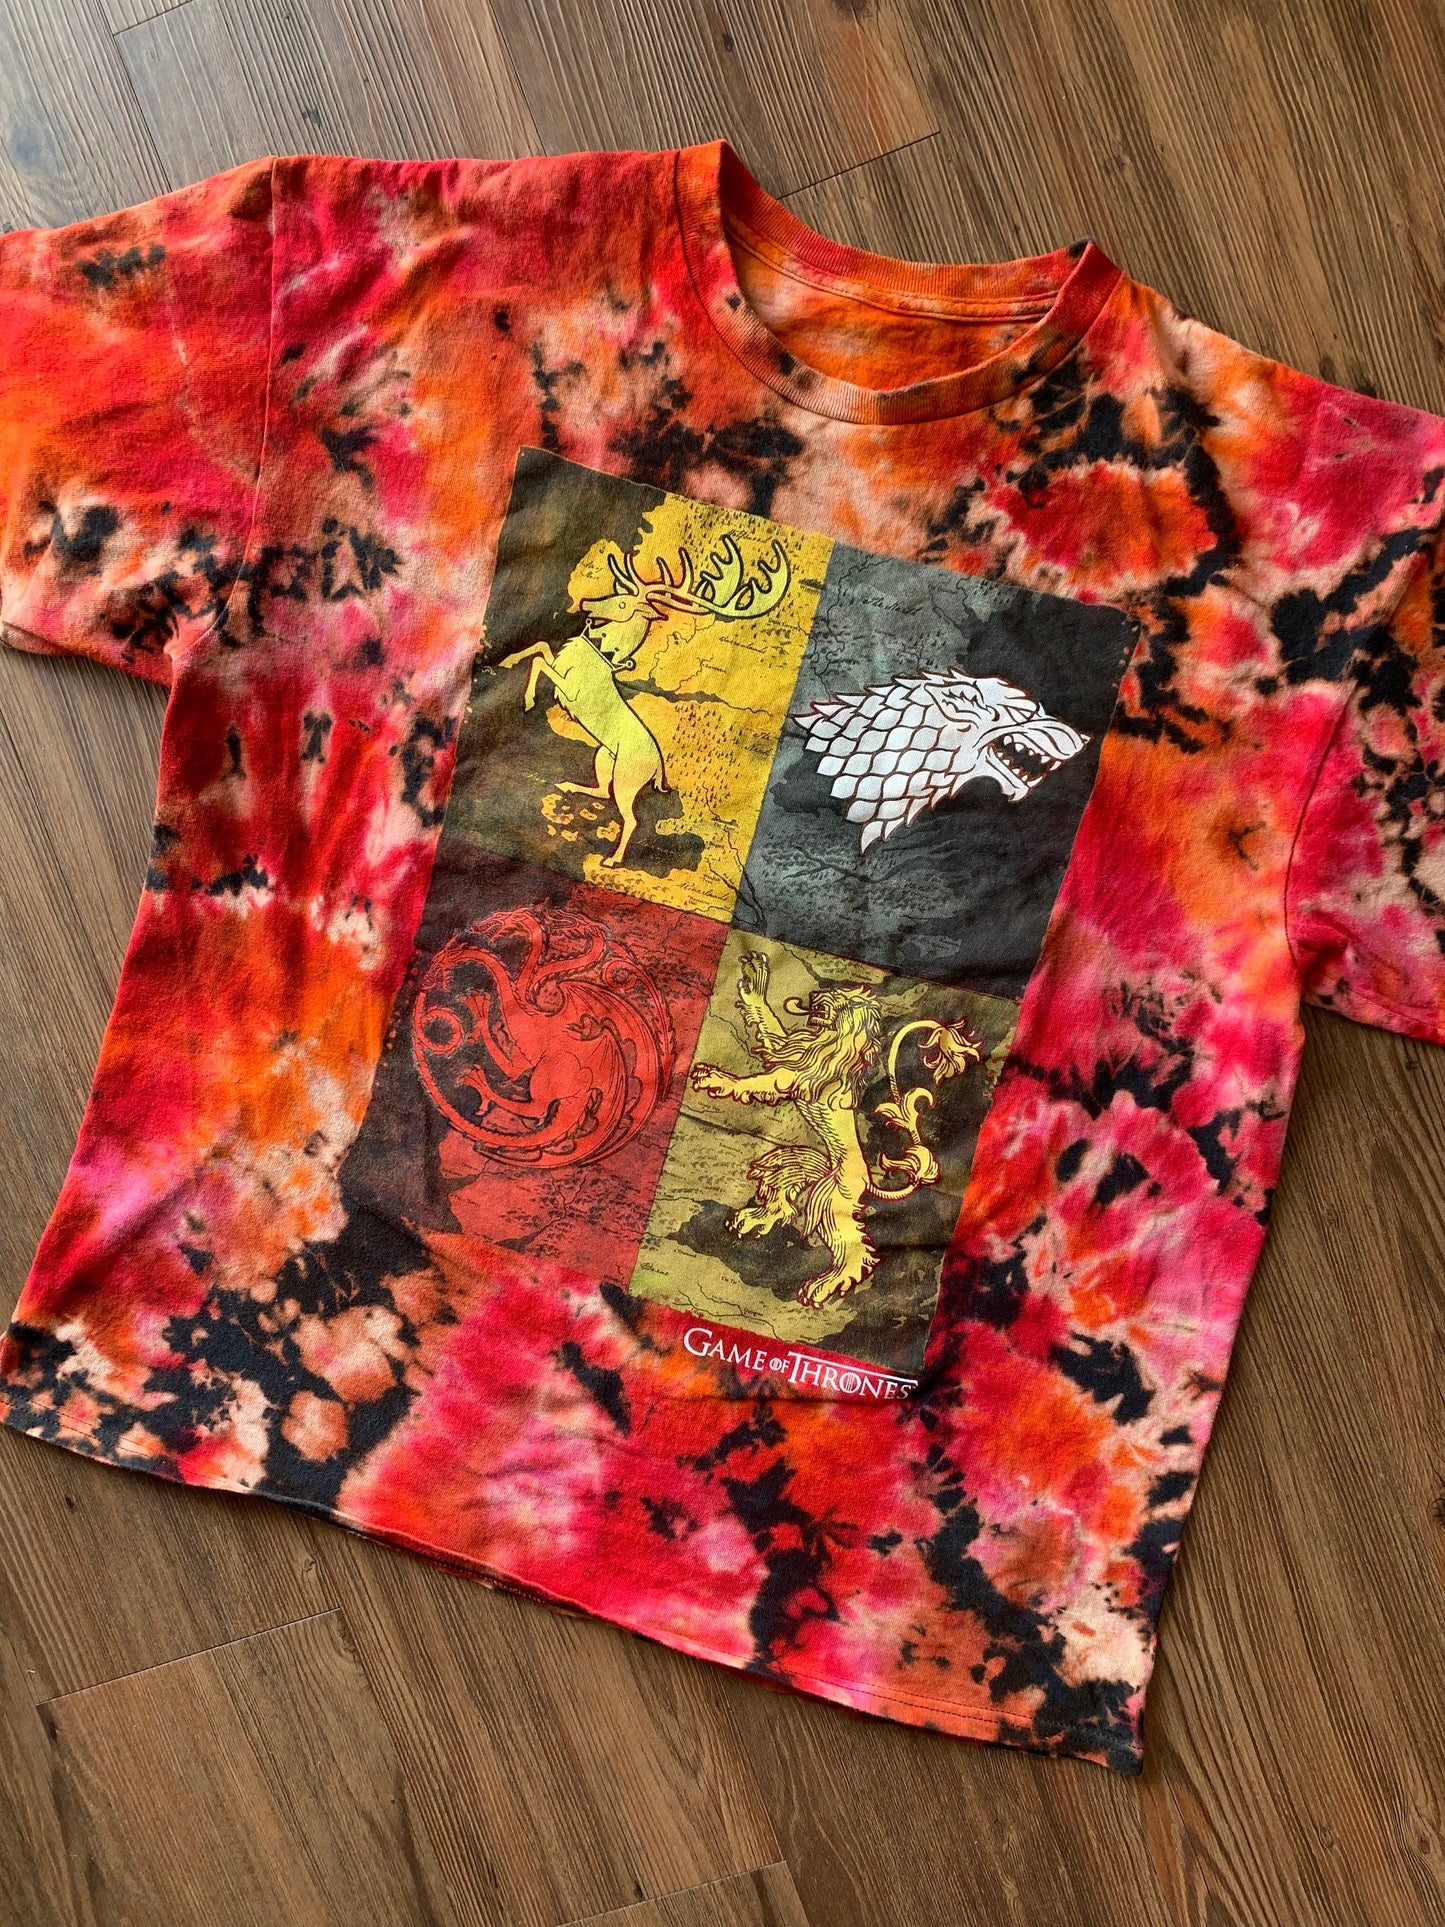 Game of Thrones Houses Handmade Reverse Tie Dye t-shirt | Bleach Acid Dye Men's L/XL Short Sleeve Top | Upcycled & Tie Dyed by Hand